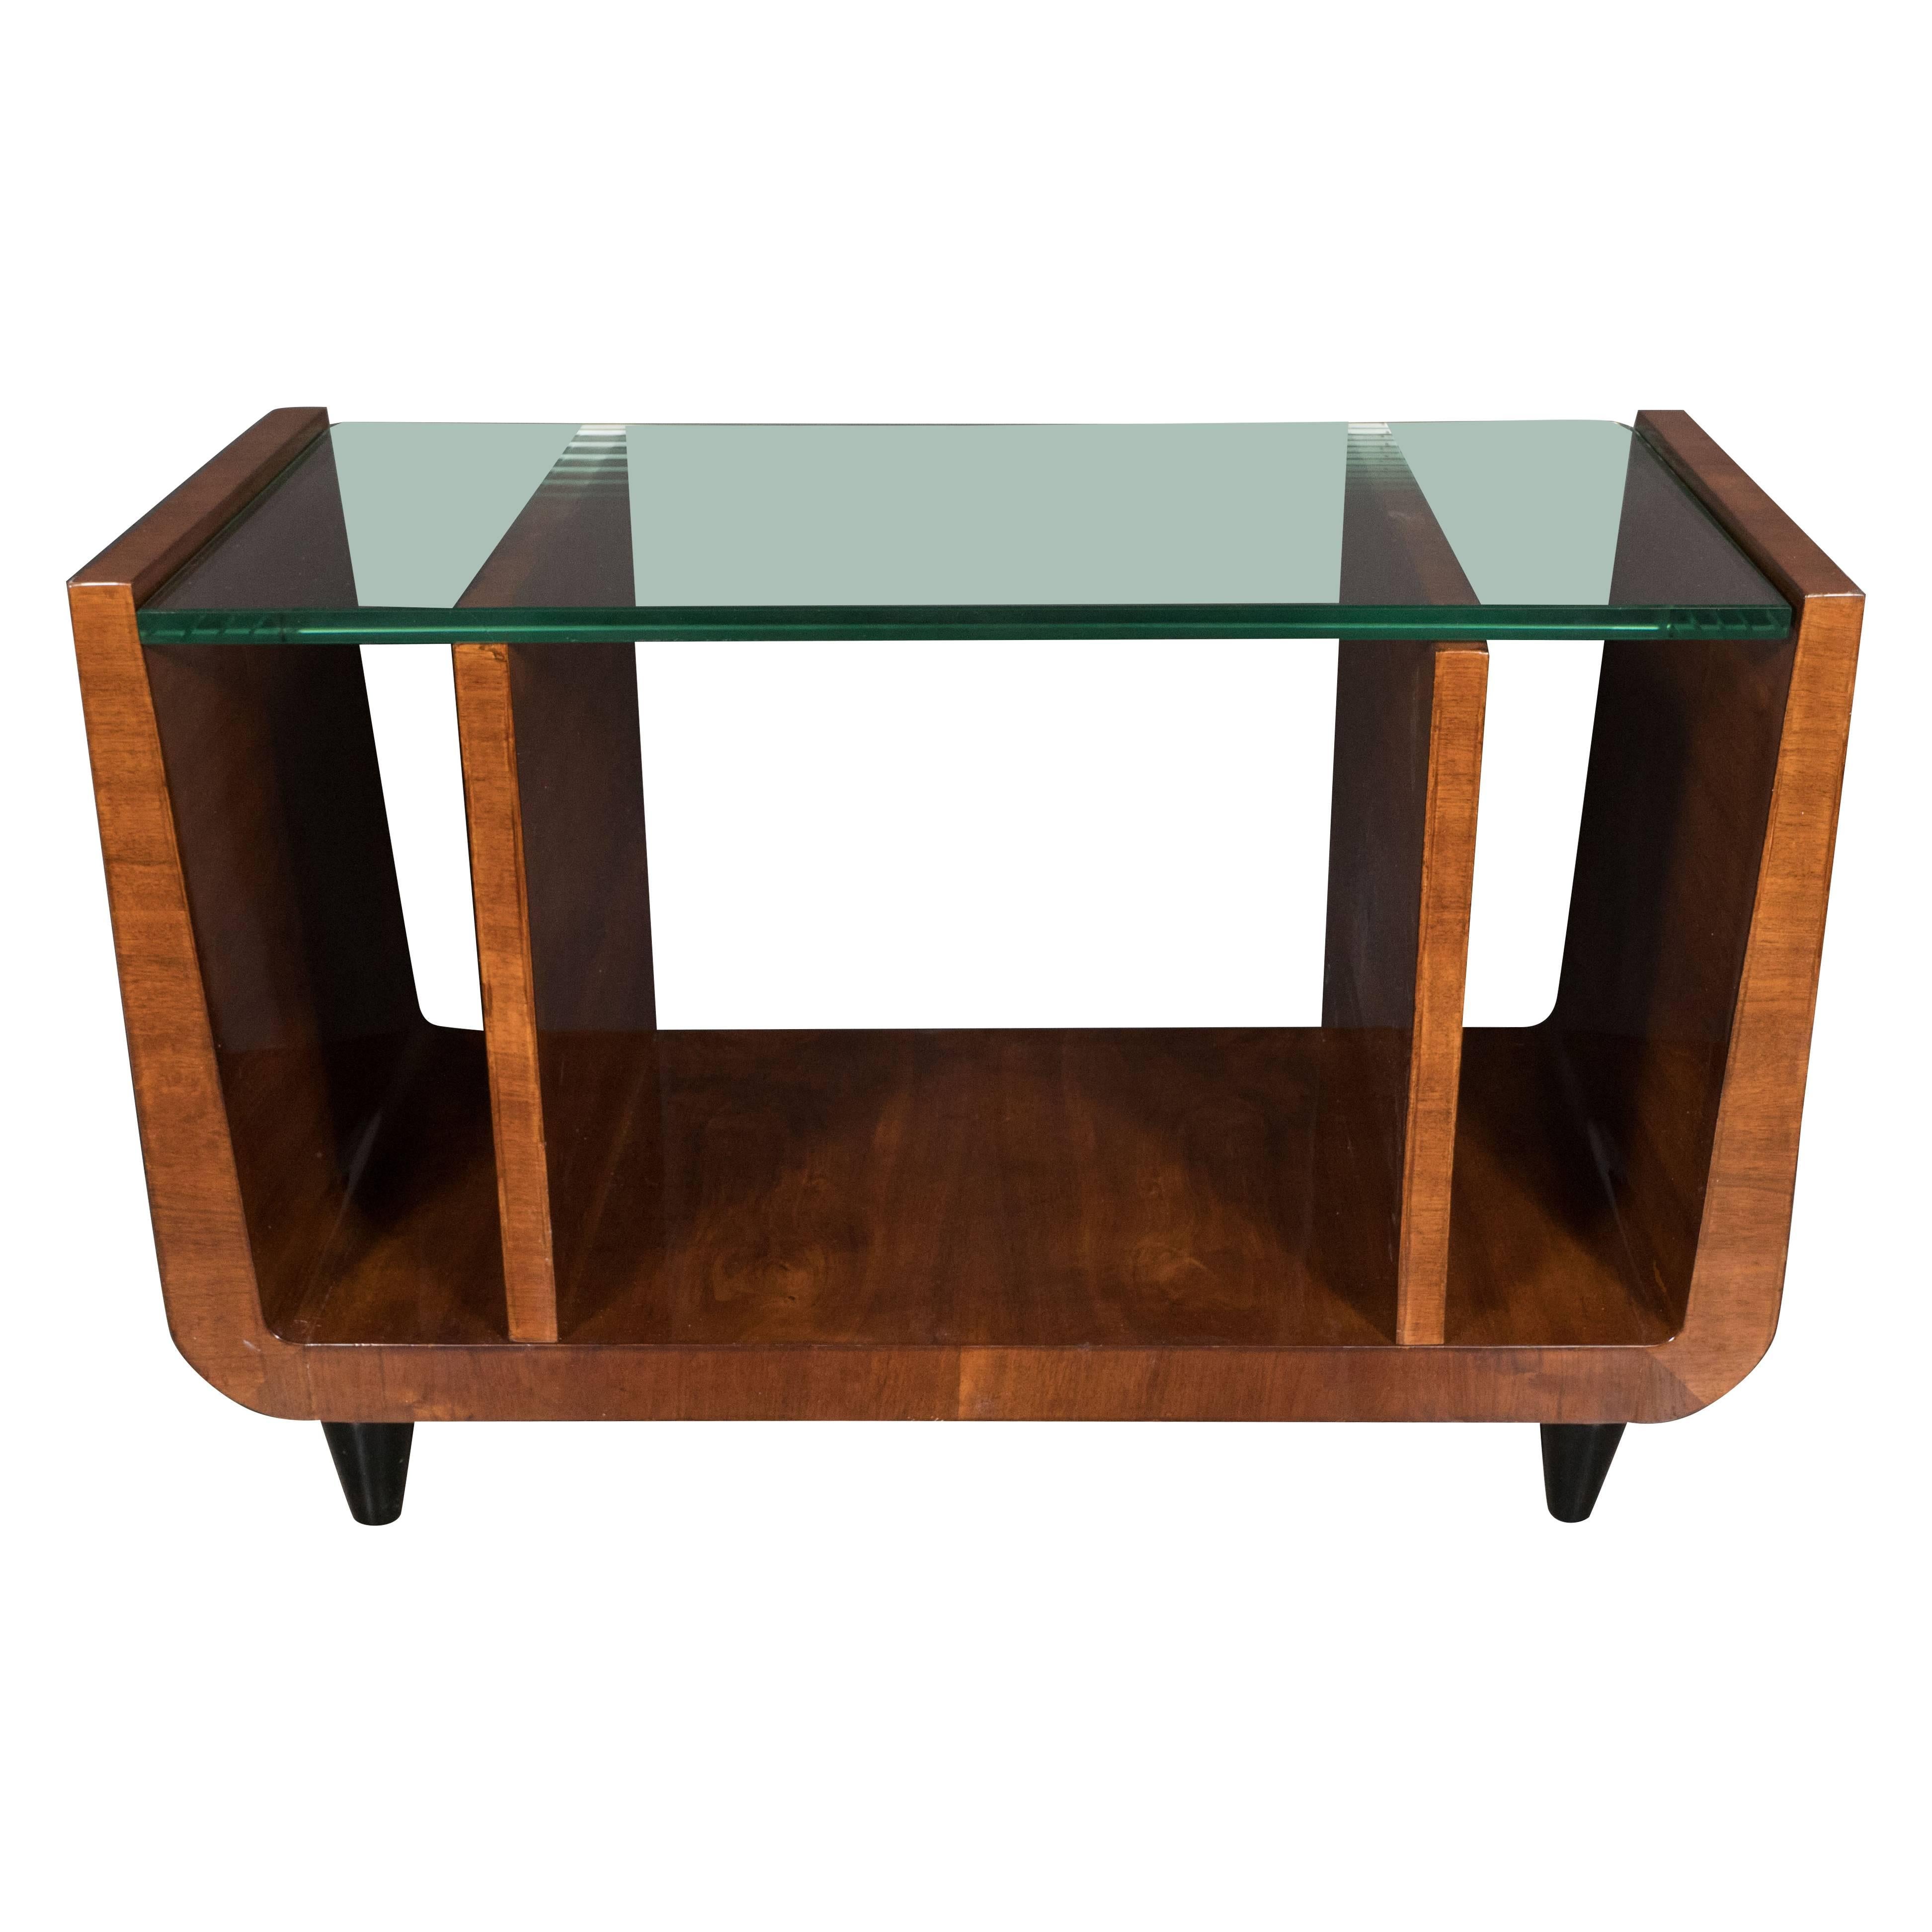 Art Deco Bookmatched Walnut and Black Lacquer Cocktail Table/Magazine Stand